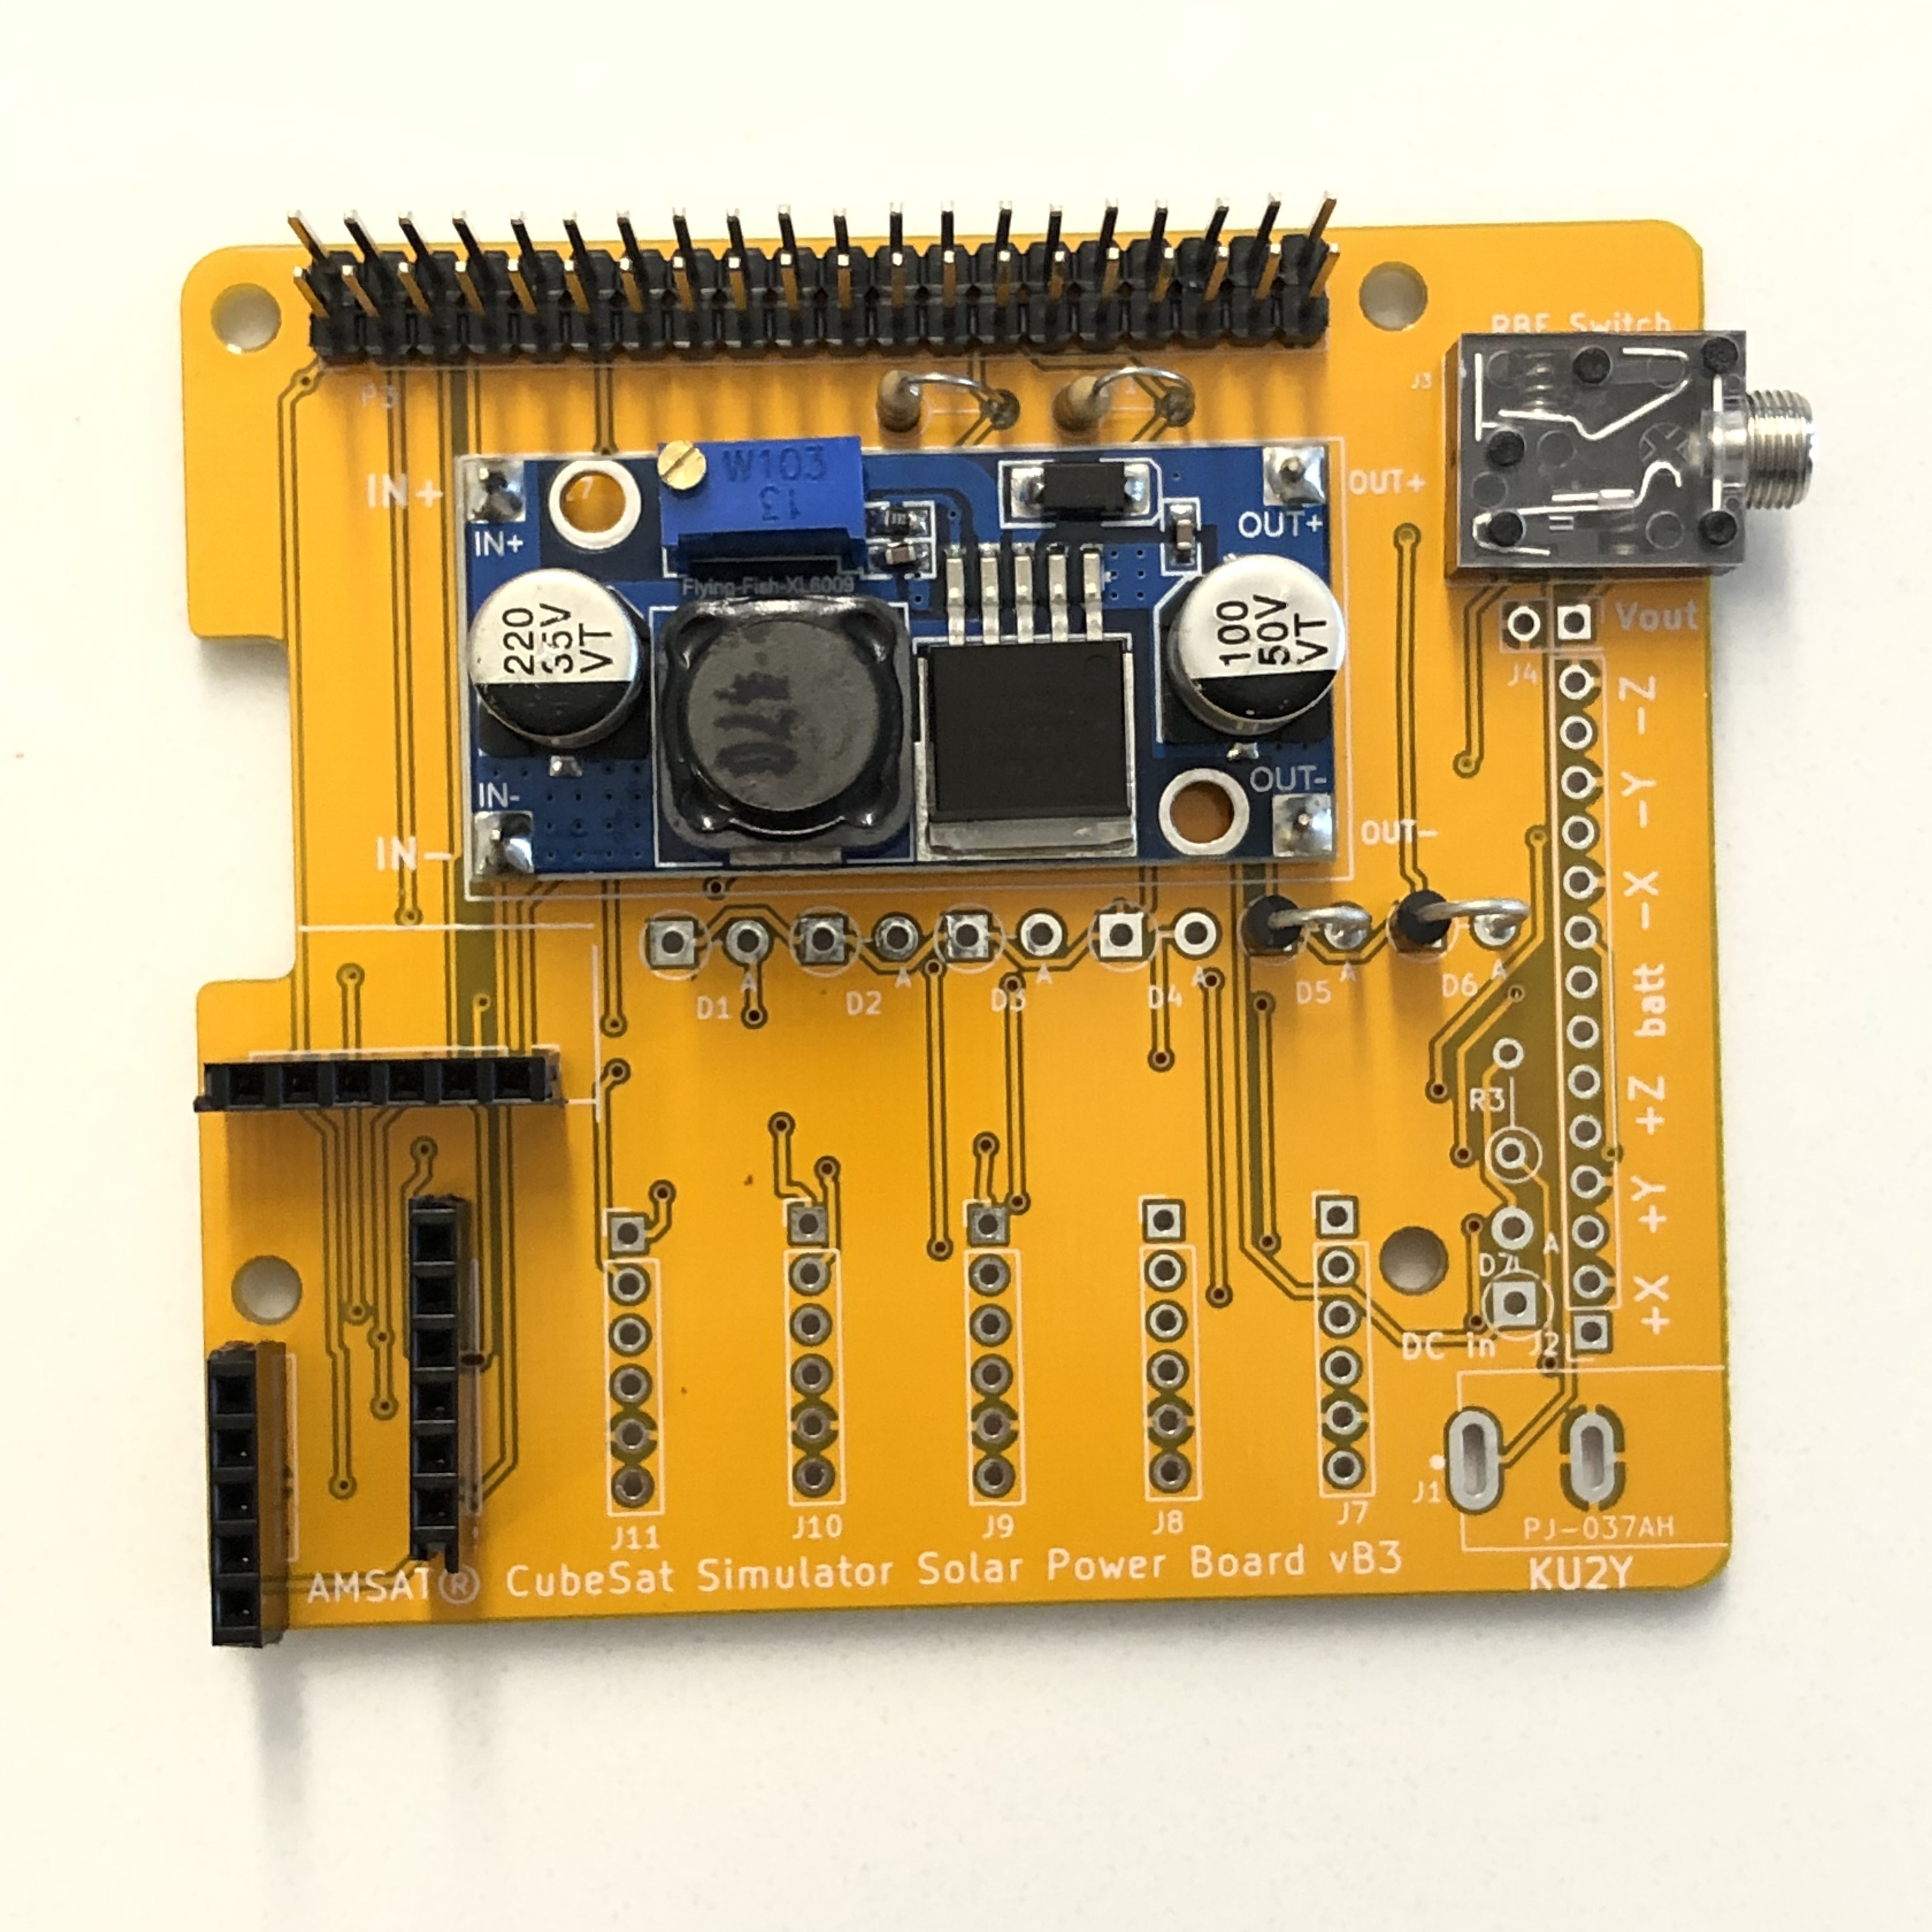 PCB with R1 and R2 installed